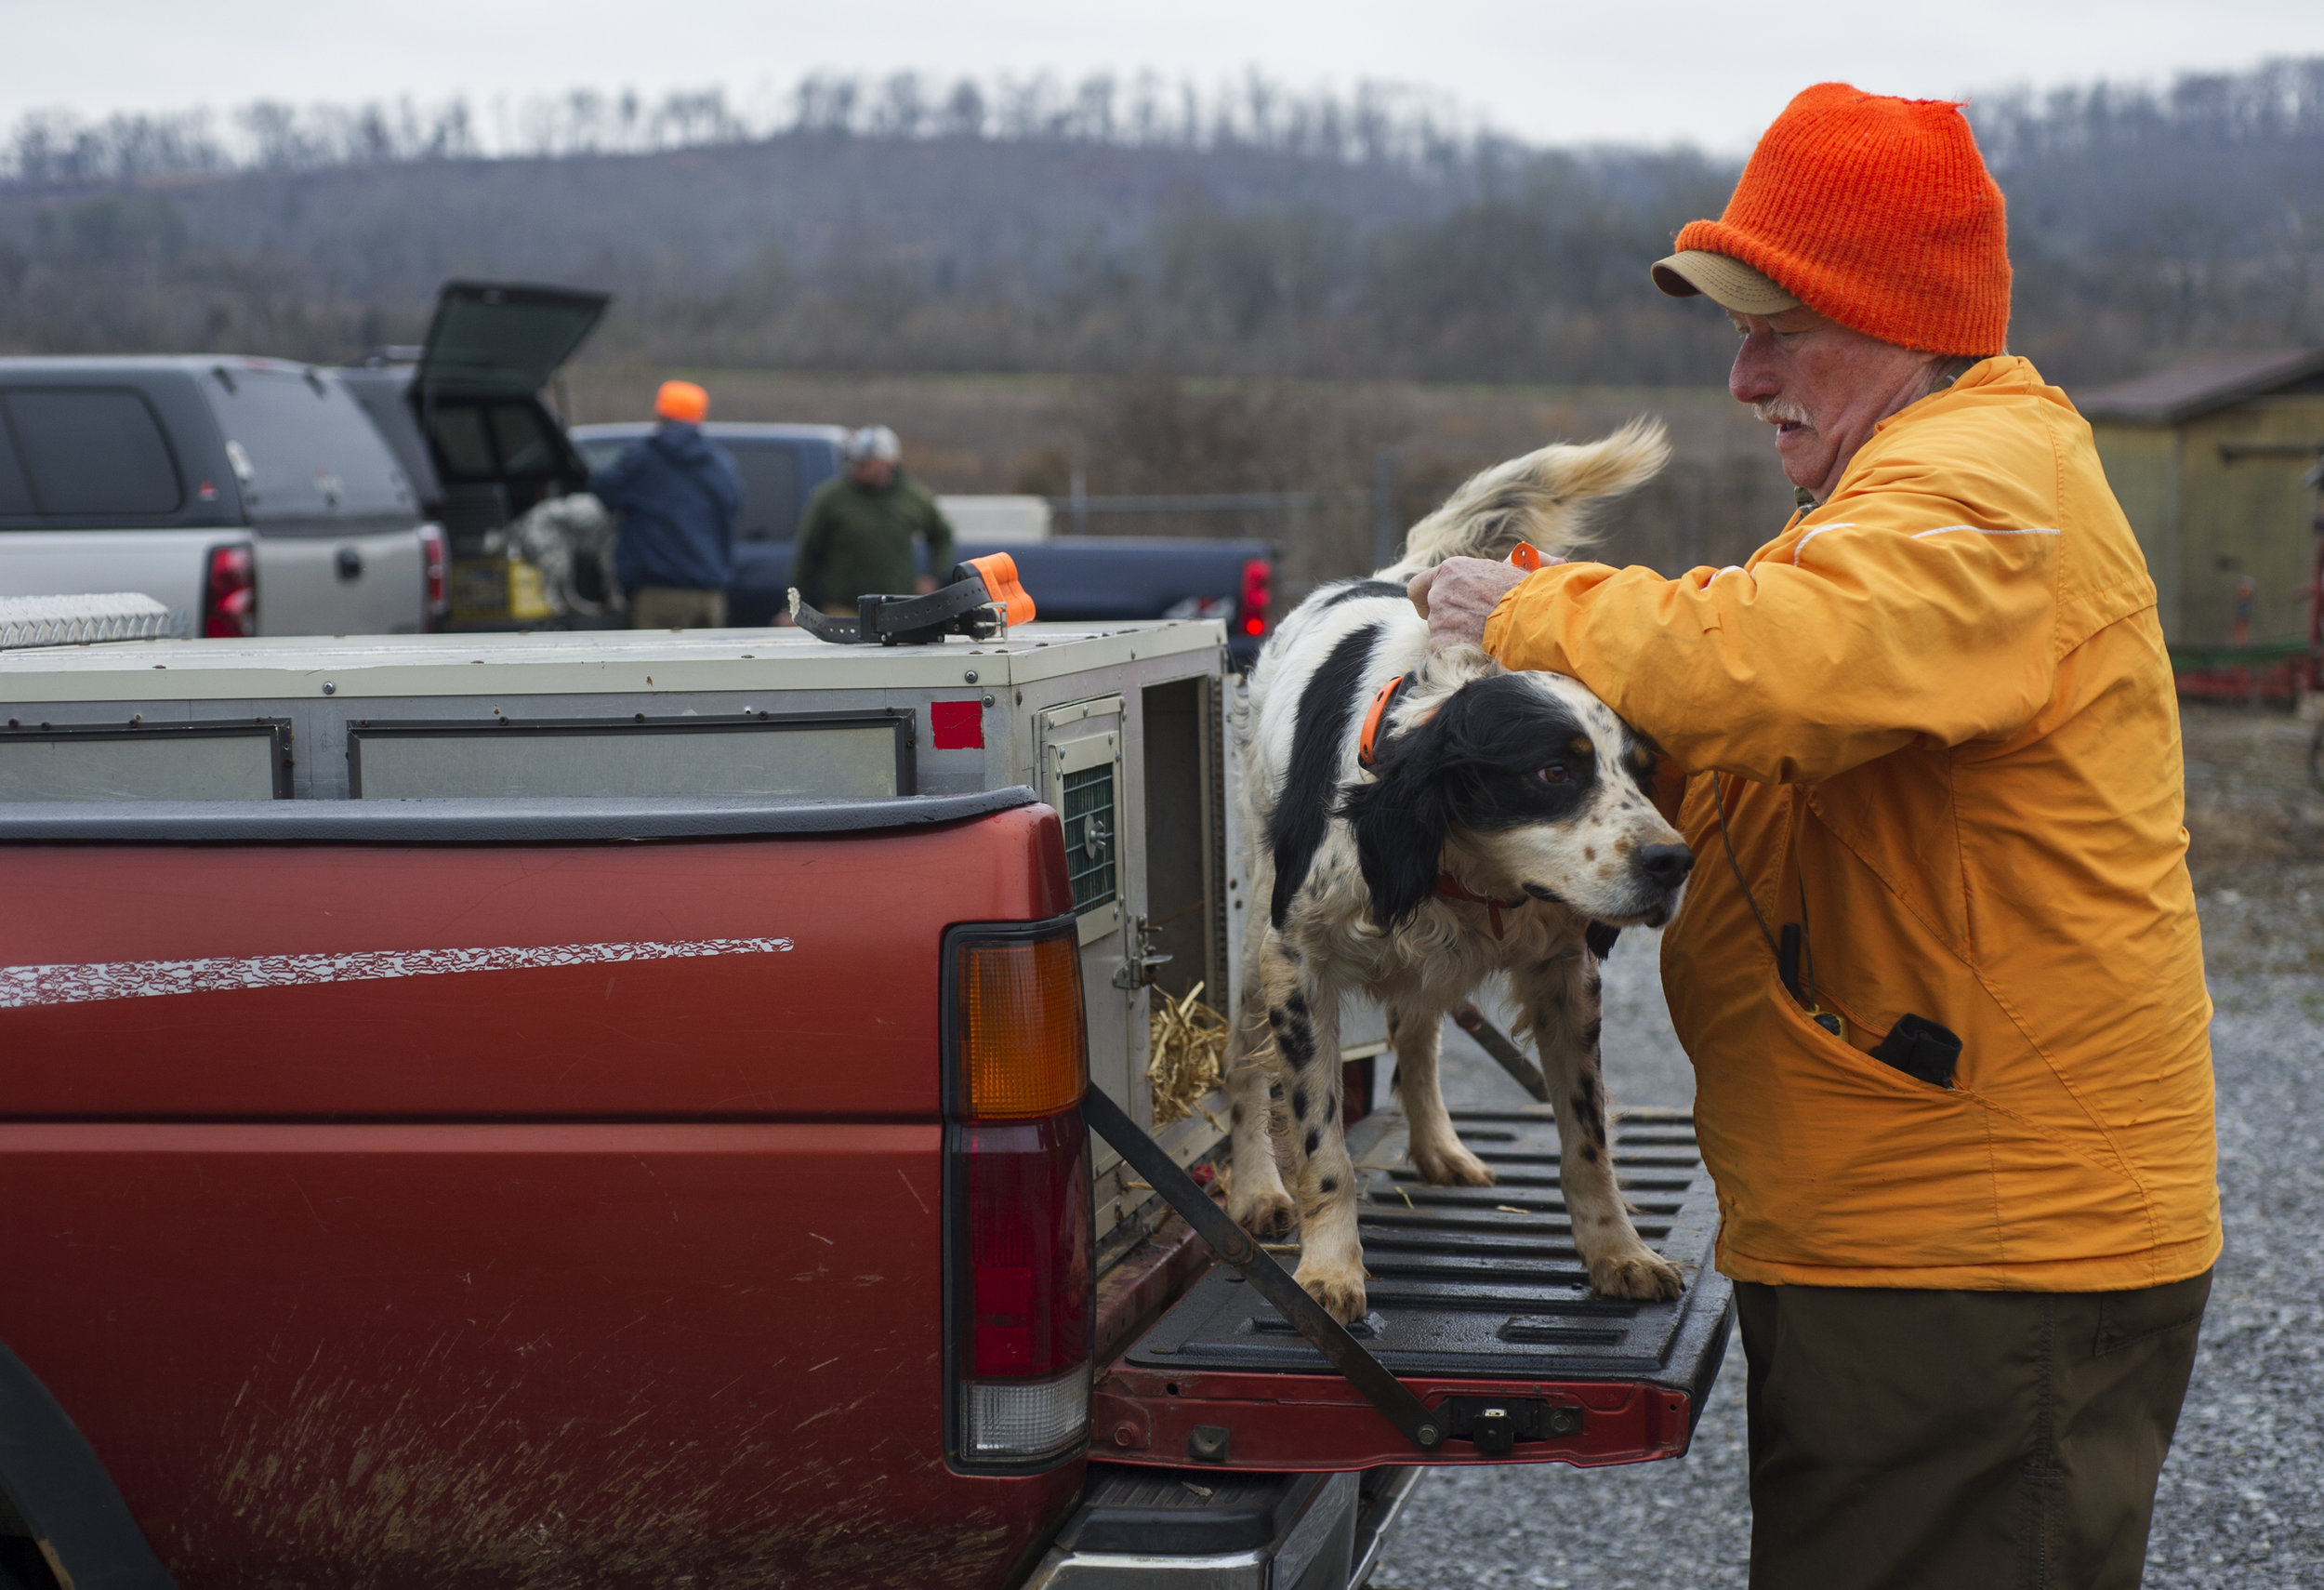  Glenn Palmer puts a collar on his English Setter as they prepare to hunt for quail coveys during a quail census conducted by the the Tennessee Wildlife Resource Agency using bird dogs at Kiker Bottoms Tuesday, Feb. 10, 2015. 